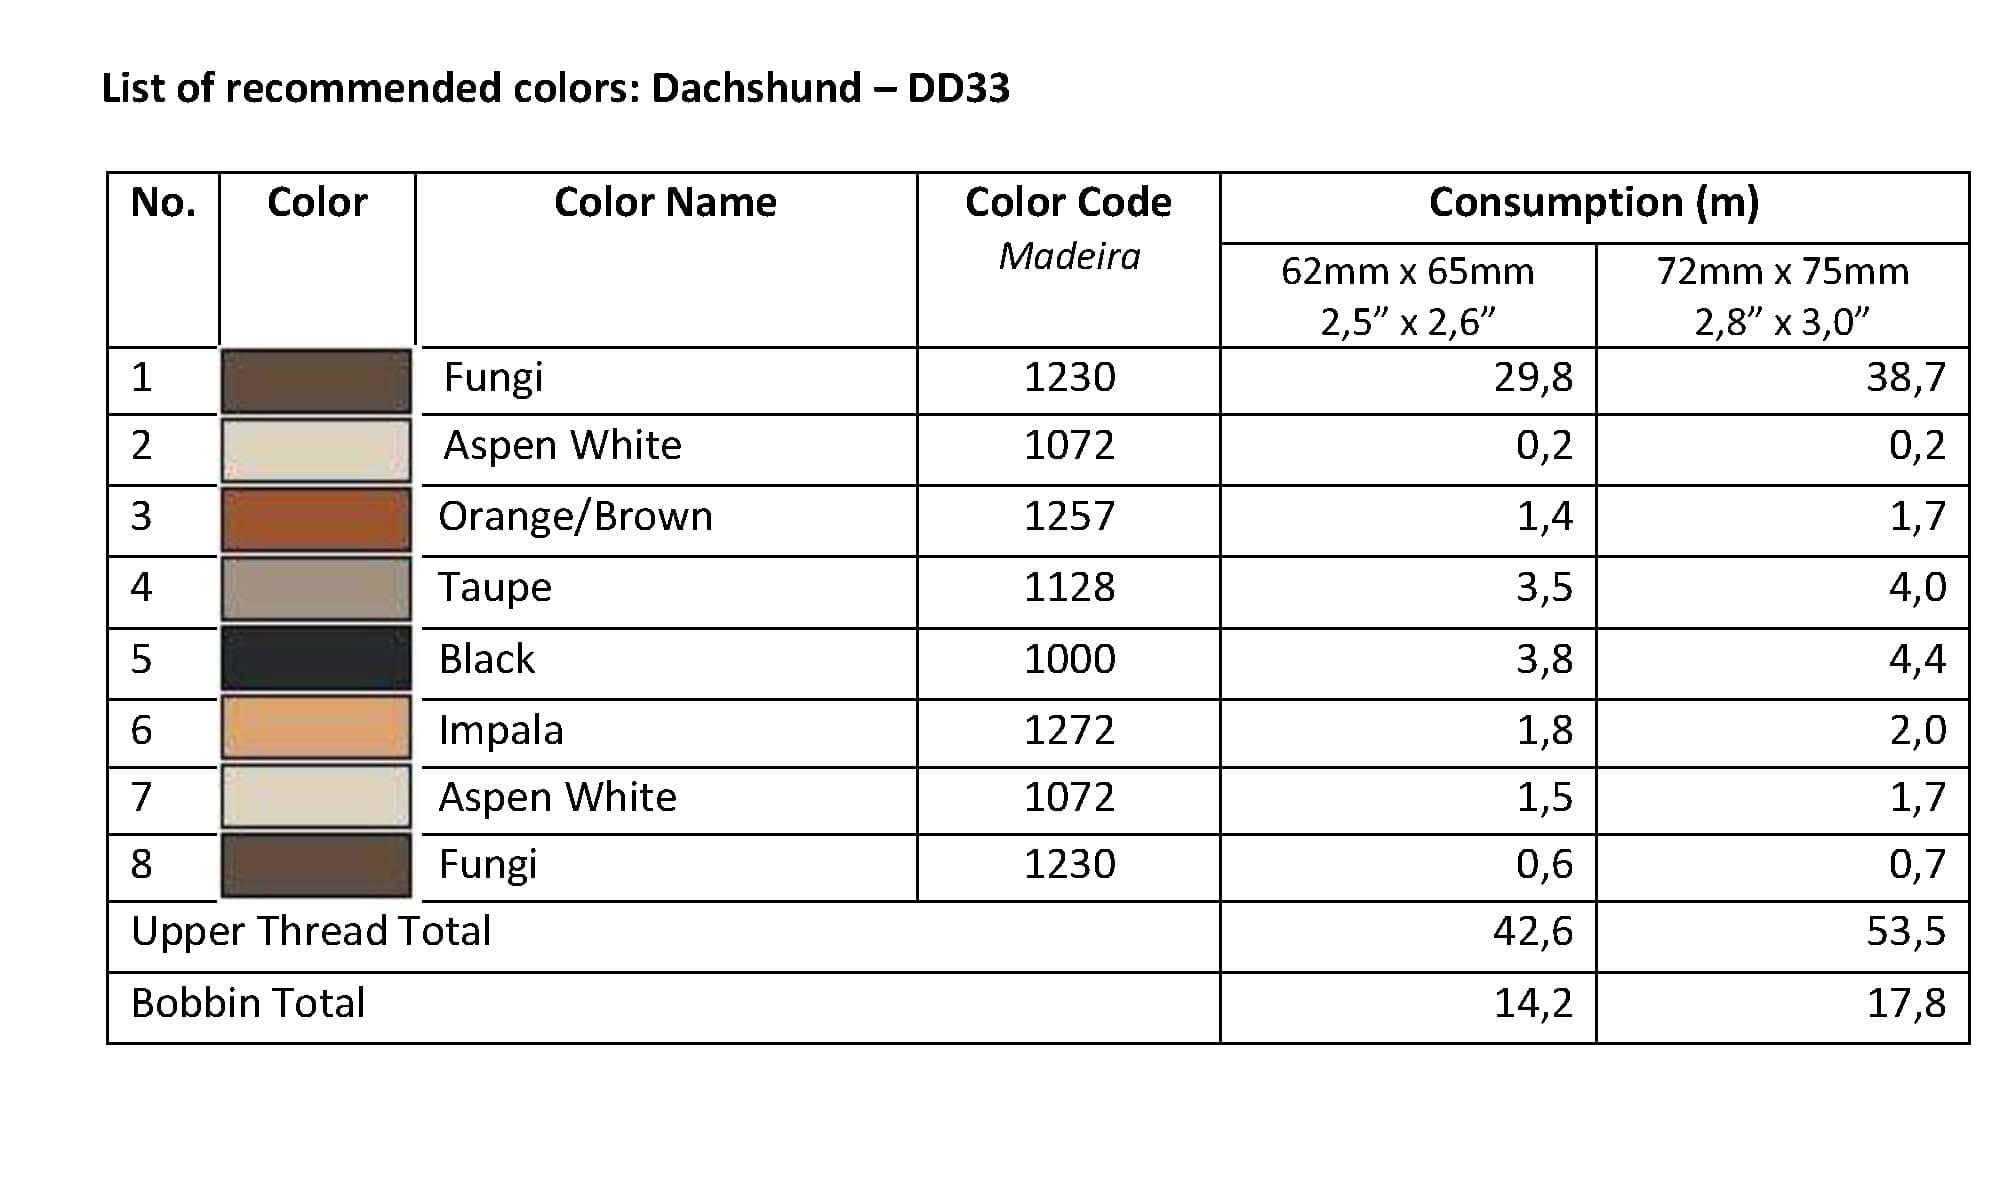 List of Recommended Colors - Dachshund DD33